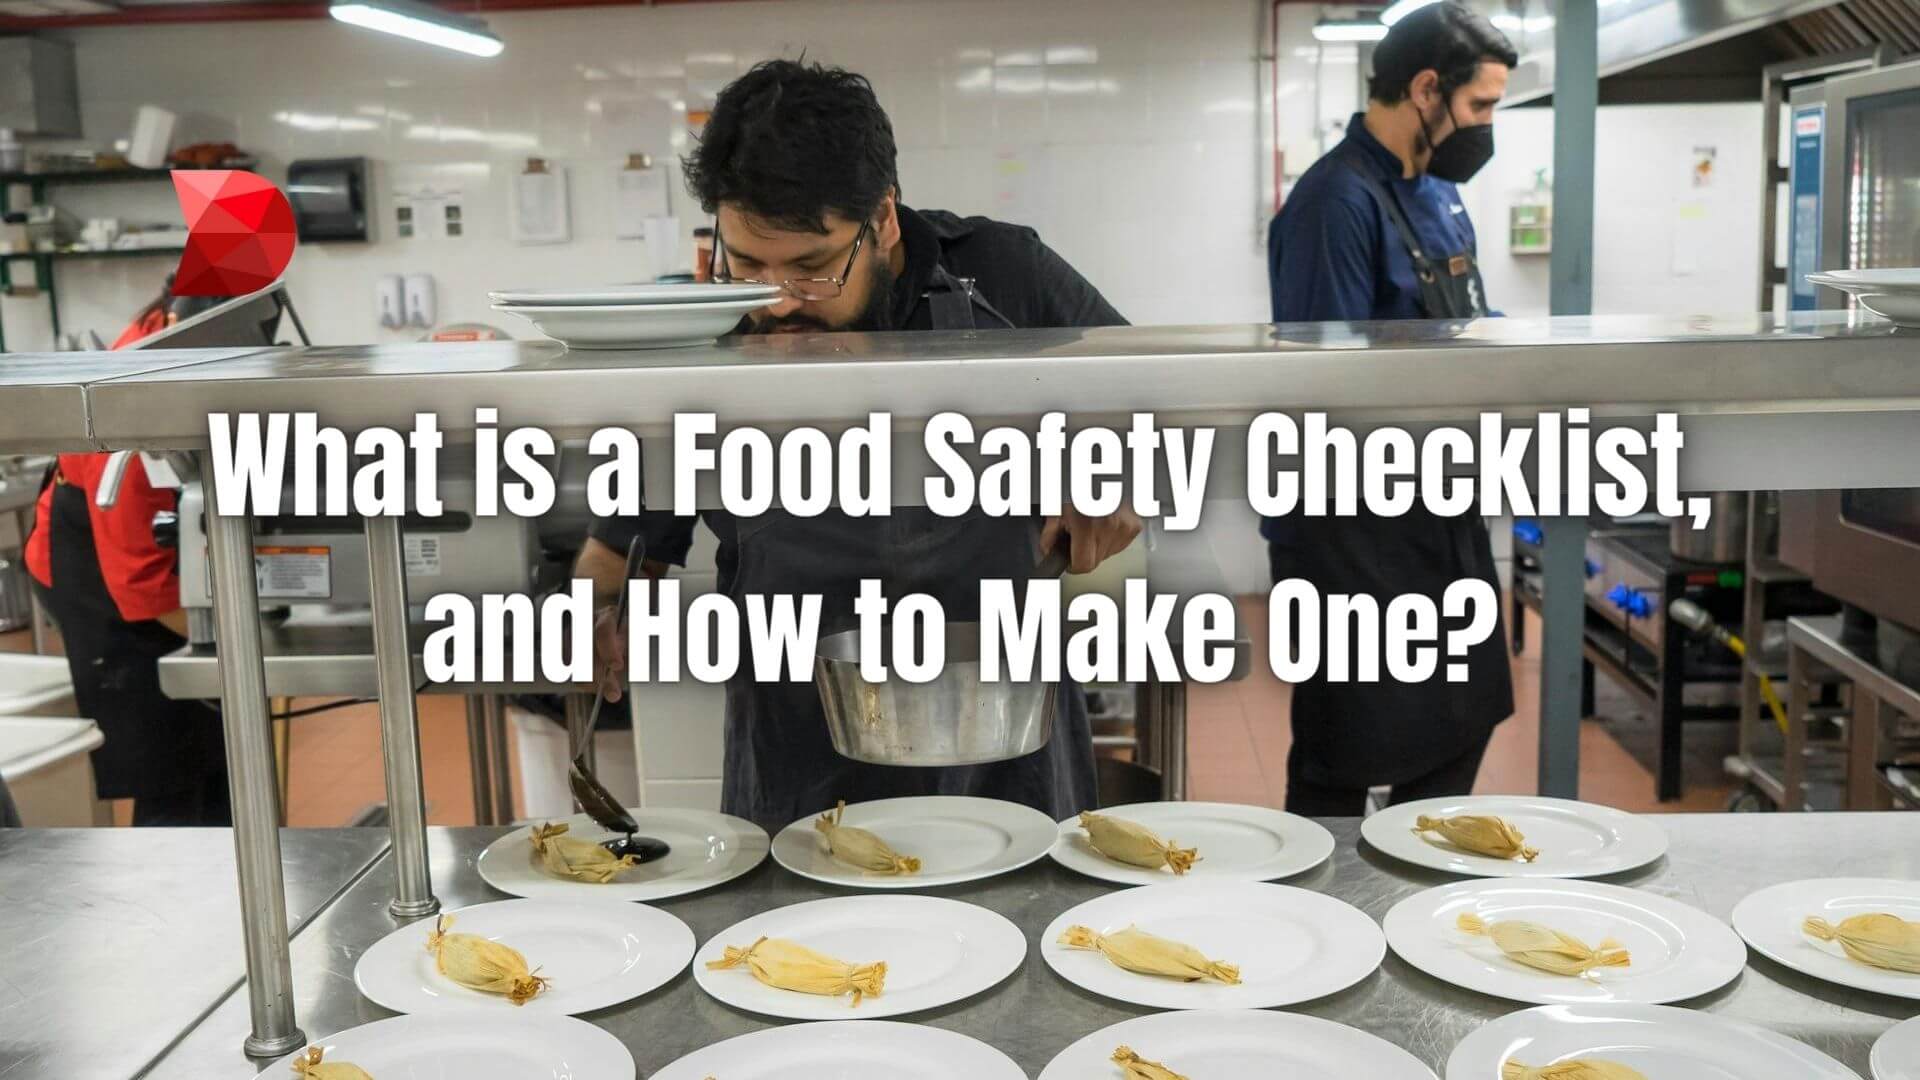 Discover essential steps in creating a food safety checklist. Learn expert tips and techniques to ensure food hygiene and compliance.